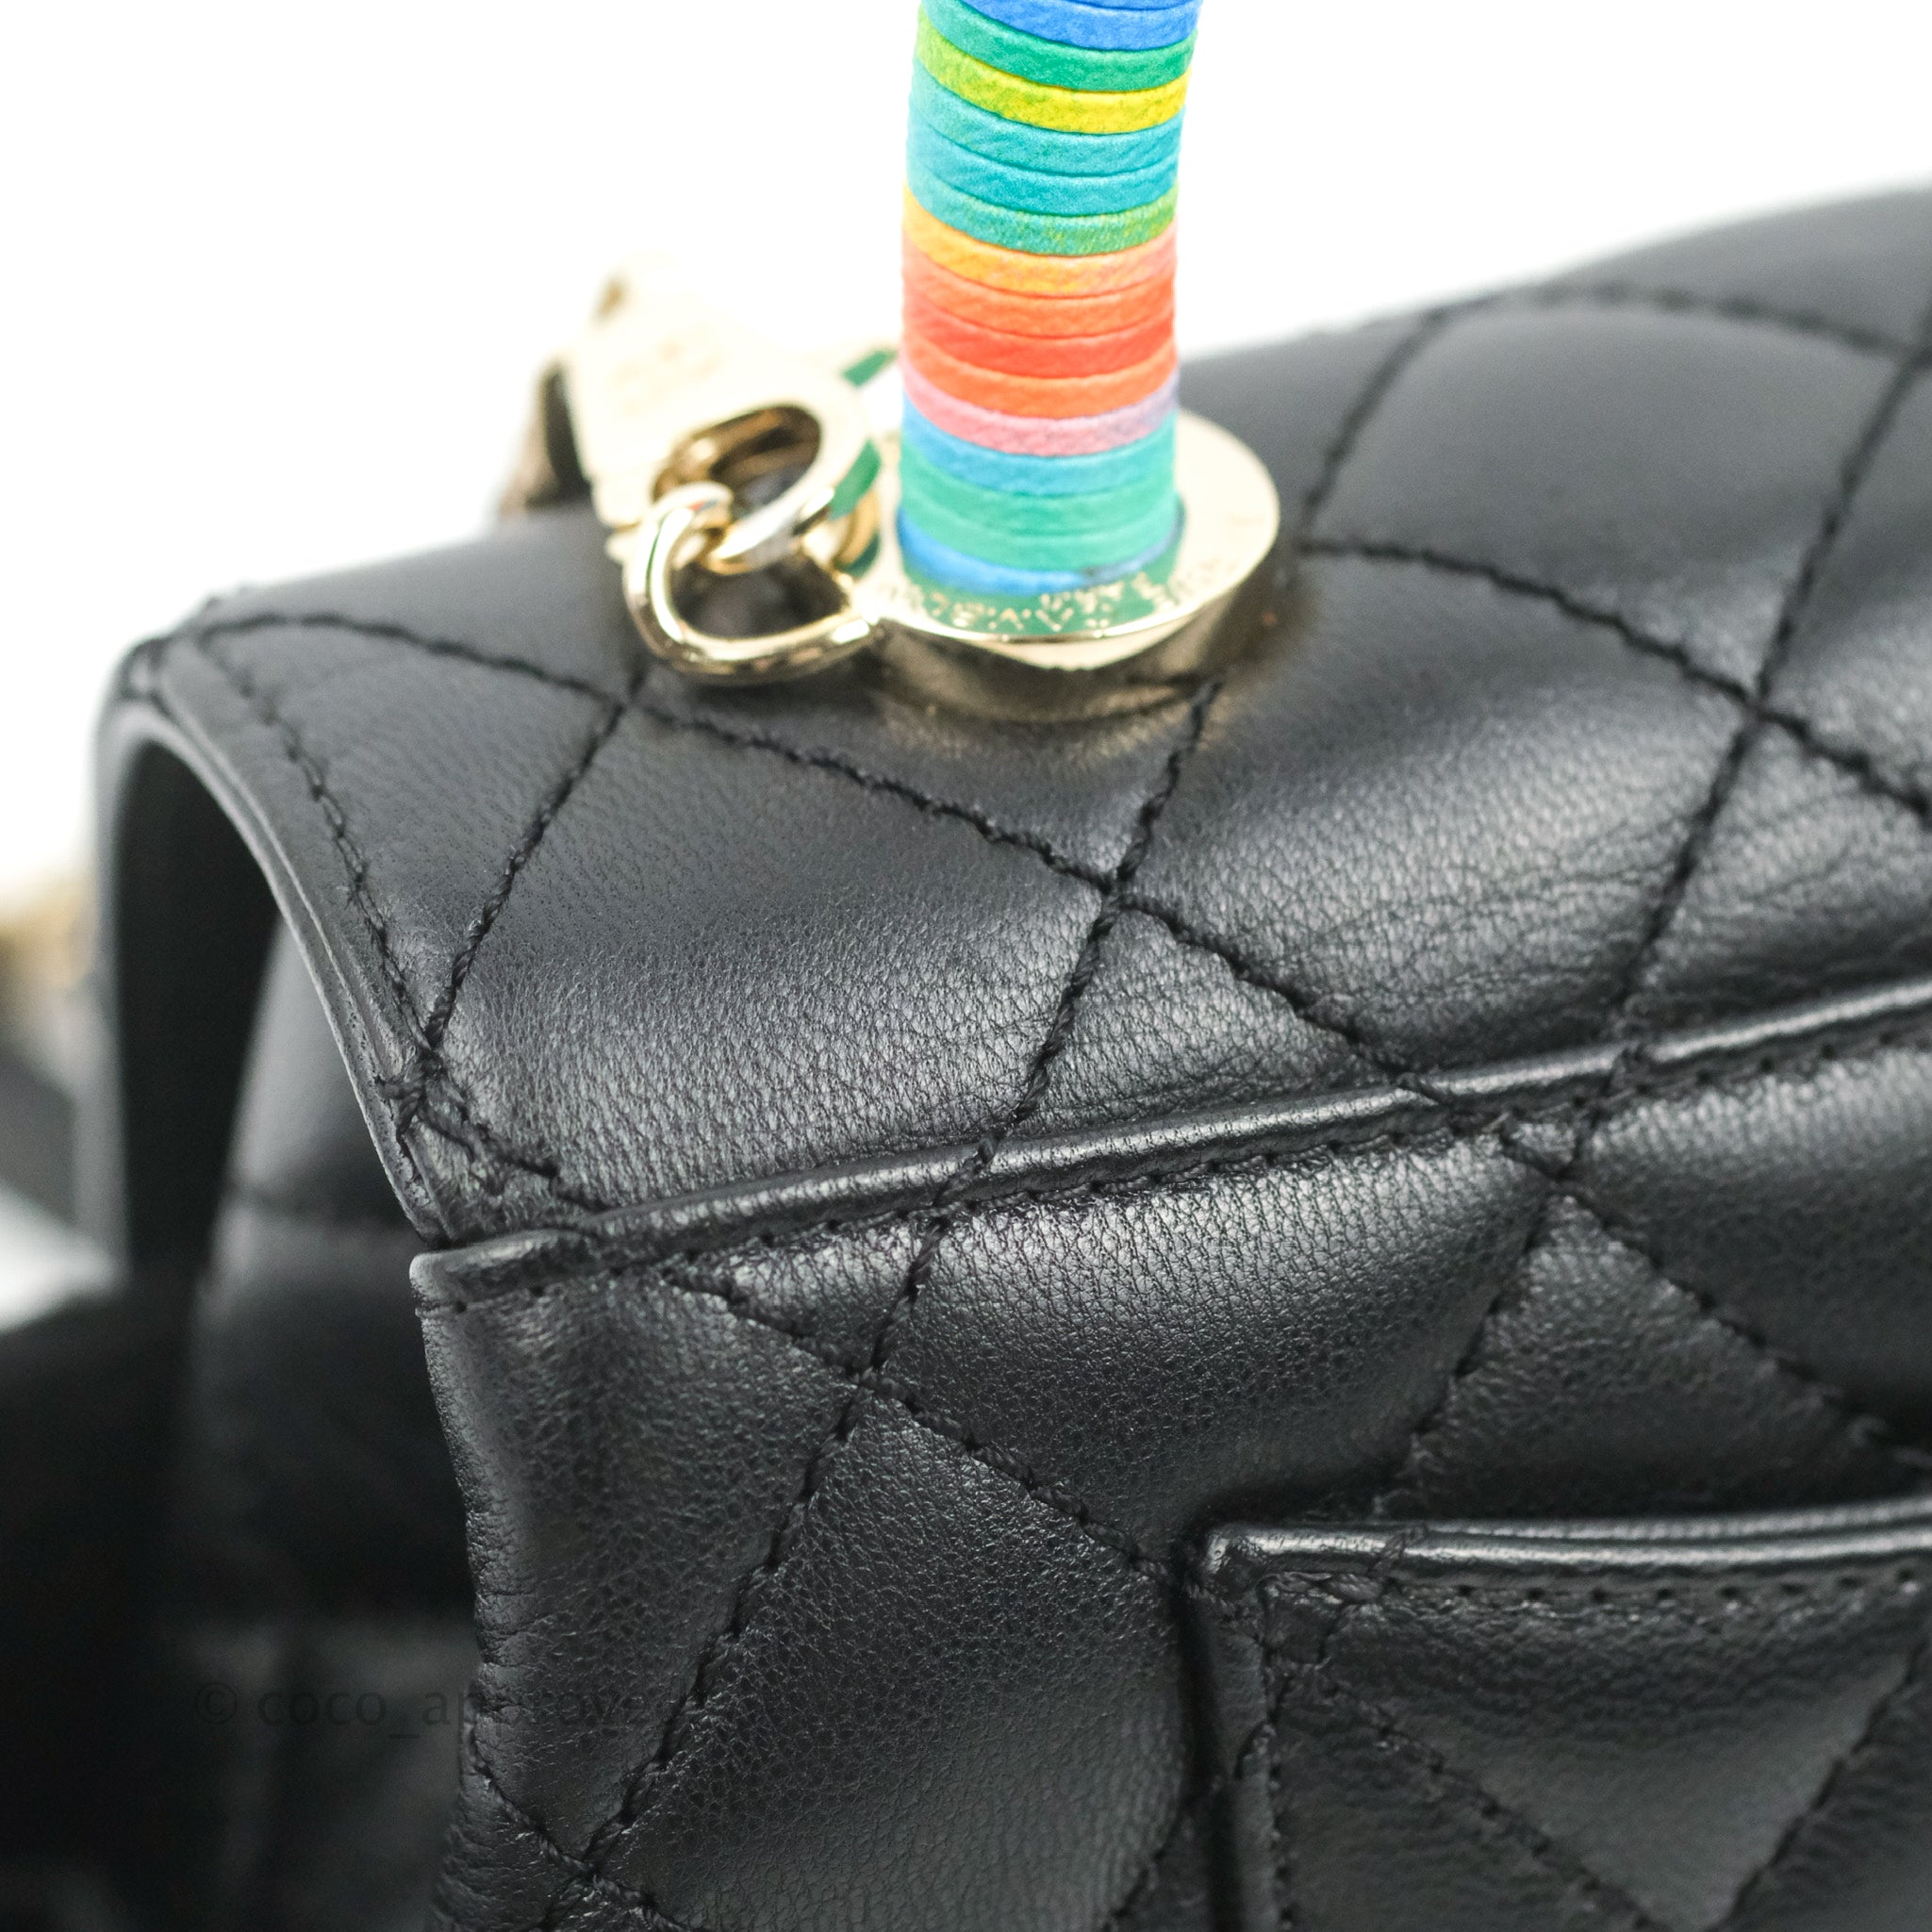 Chanel Quilted Mini Rainbow Coco Handle Bag Lambskin Black Gold Hardwa – Coco  Approved Studio